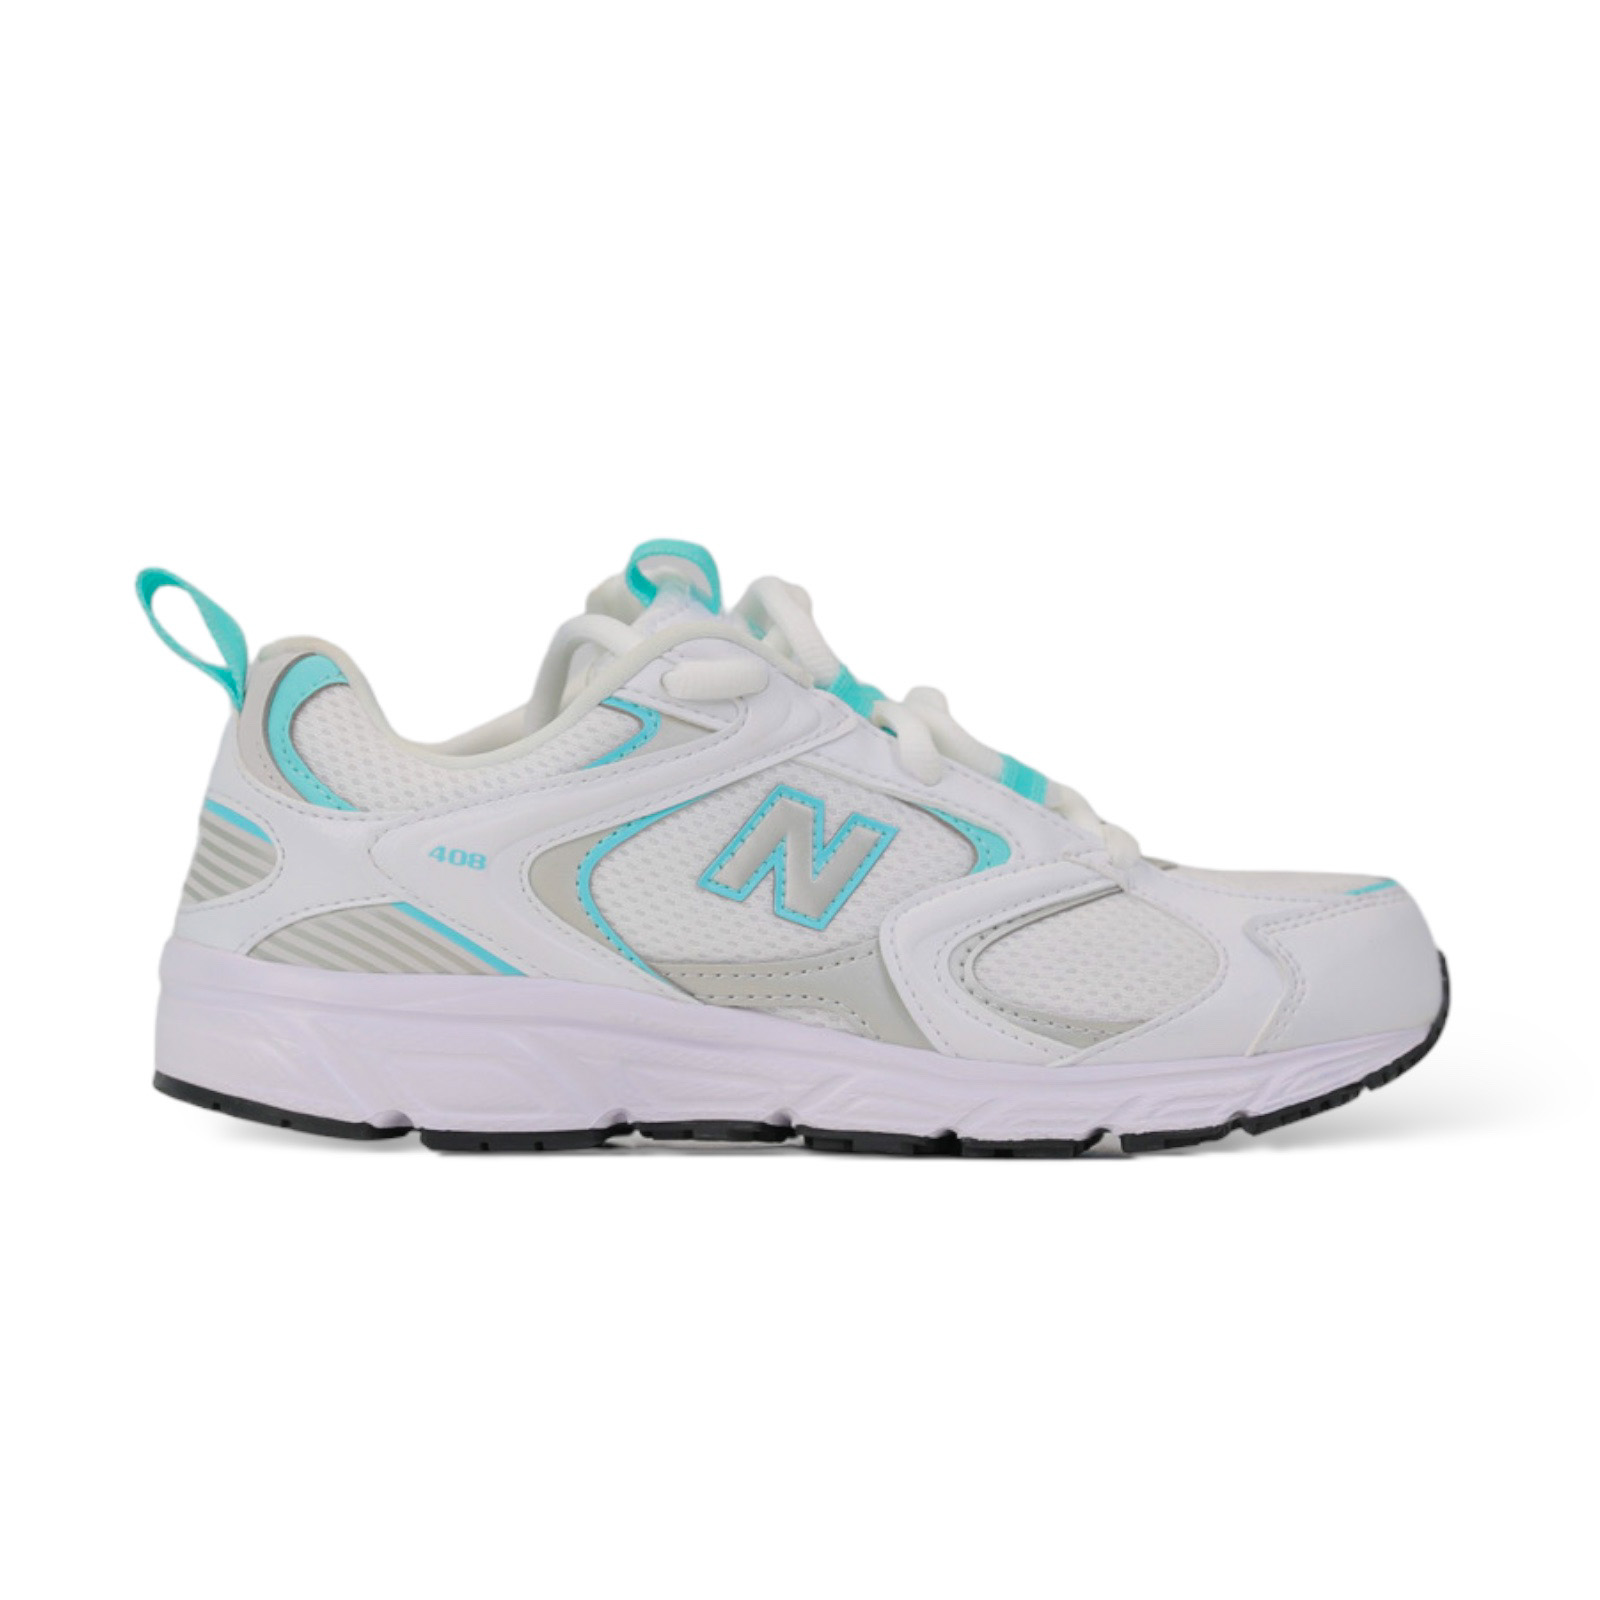  New Balance 408 trainers in white and light blue